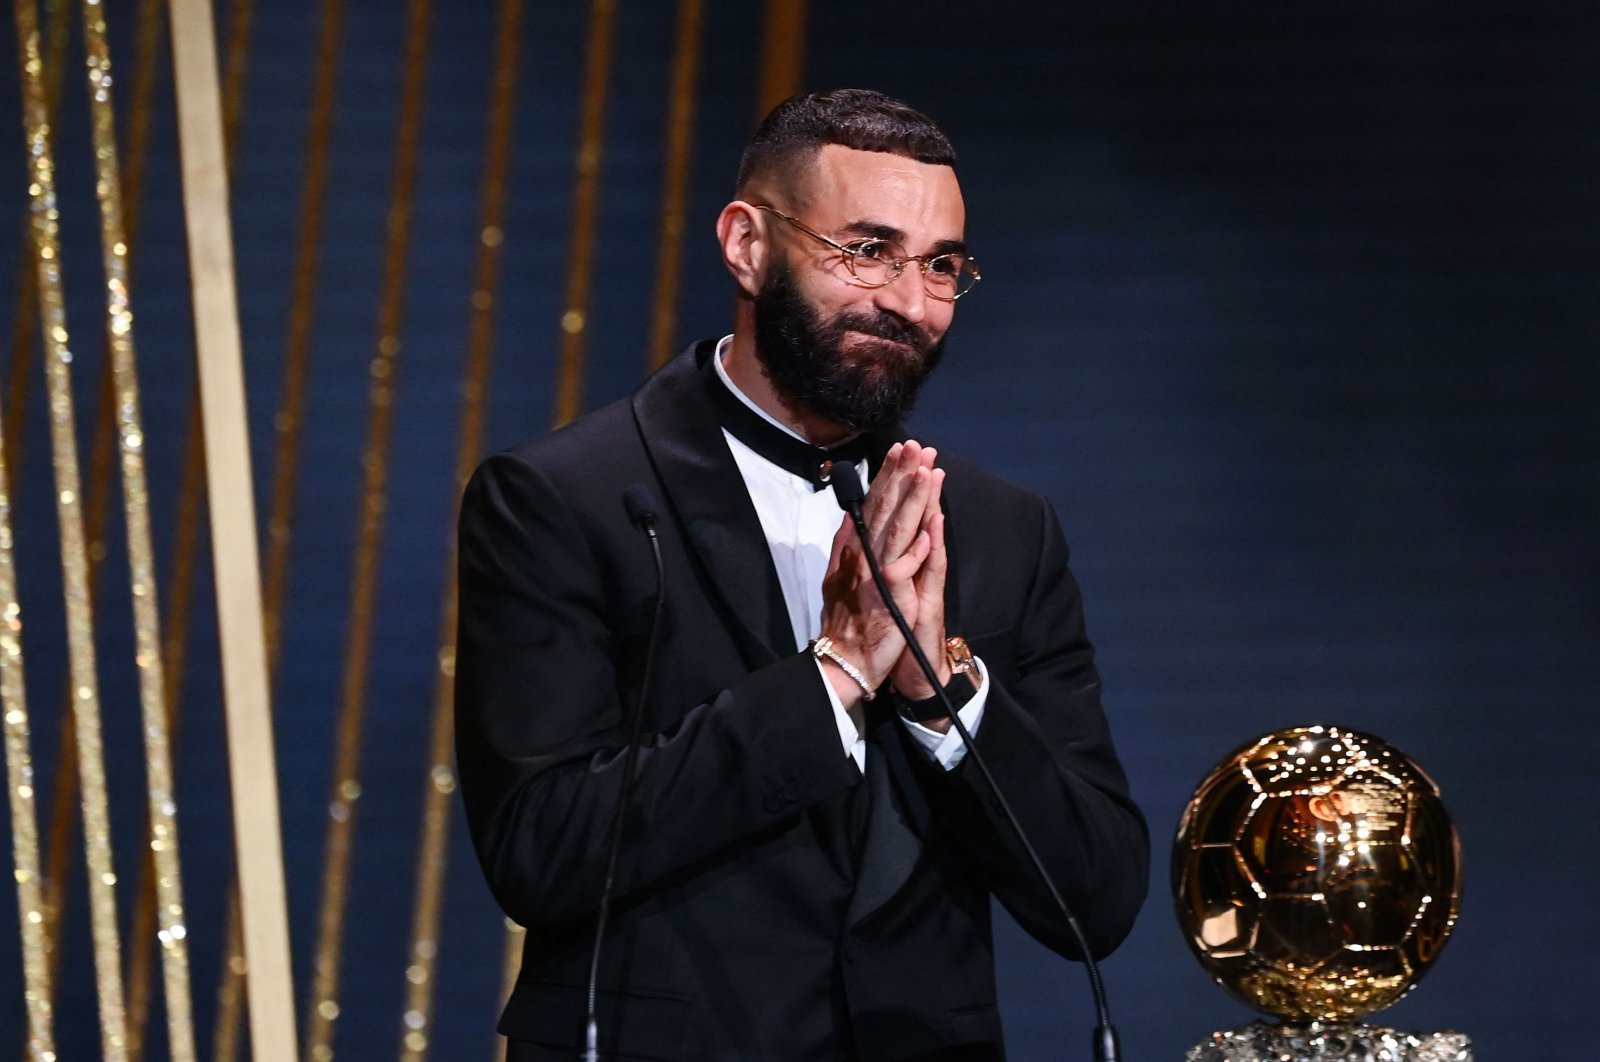 Real Madrid&#039;s French forward Karim Benzema receives the Ballon d&#039;Or award during the 2022 Ballon d&#039;Or France Football award ceremony at the Theatre du Chatelet in Paris, France, Oct. 17, 2022. (AFP Photo)